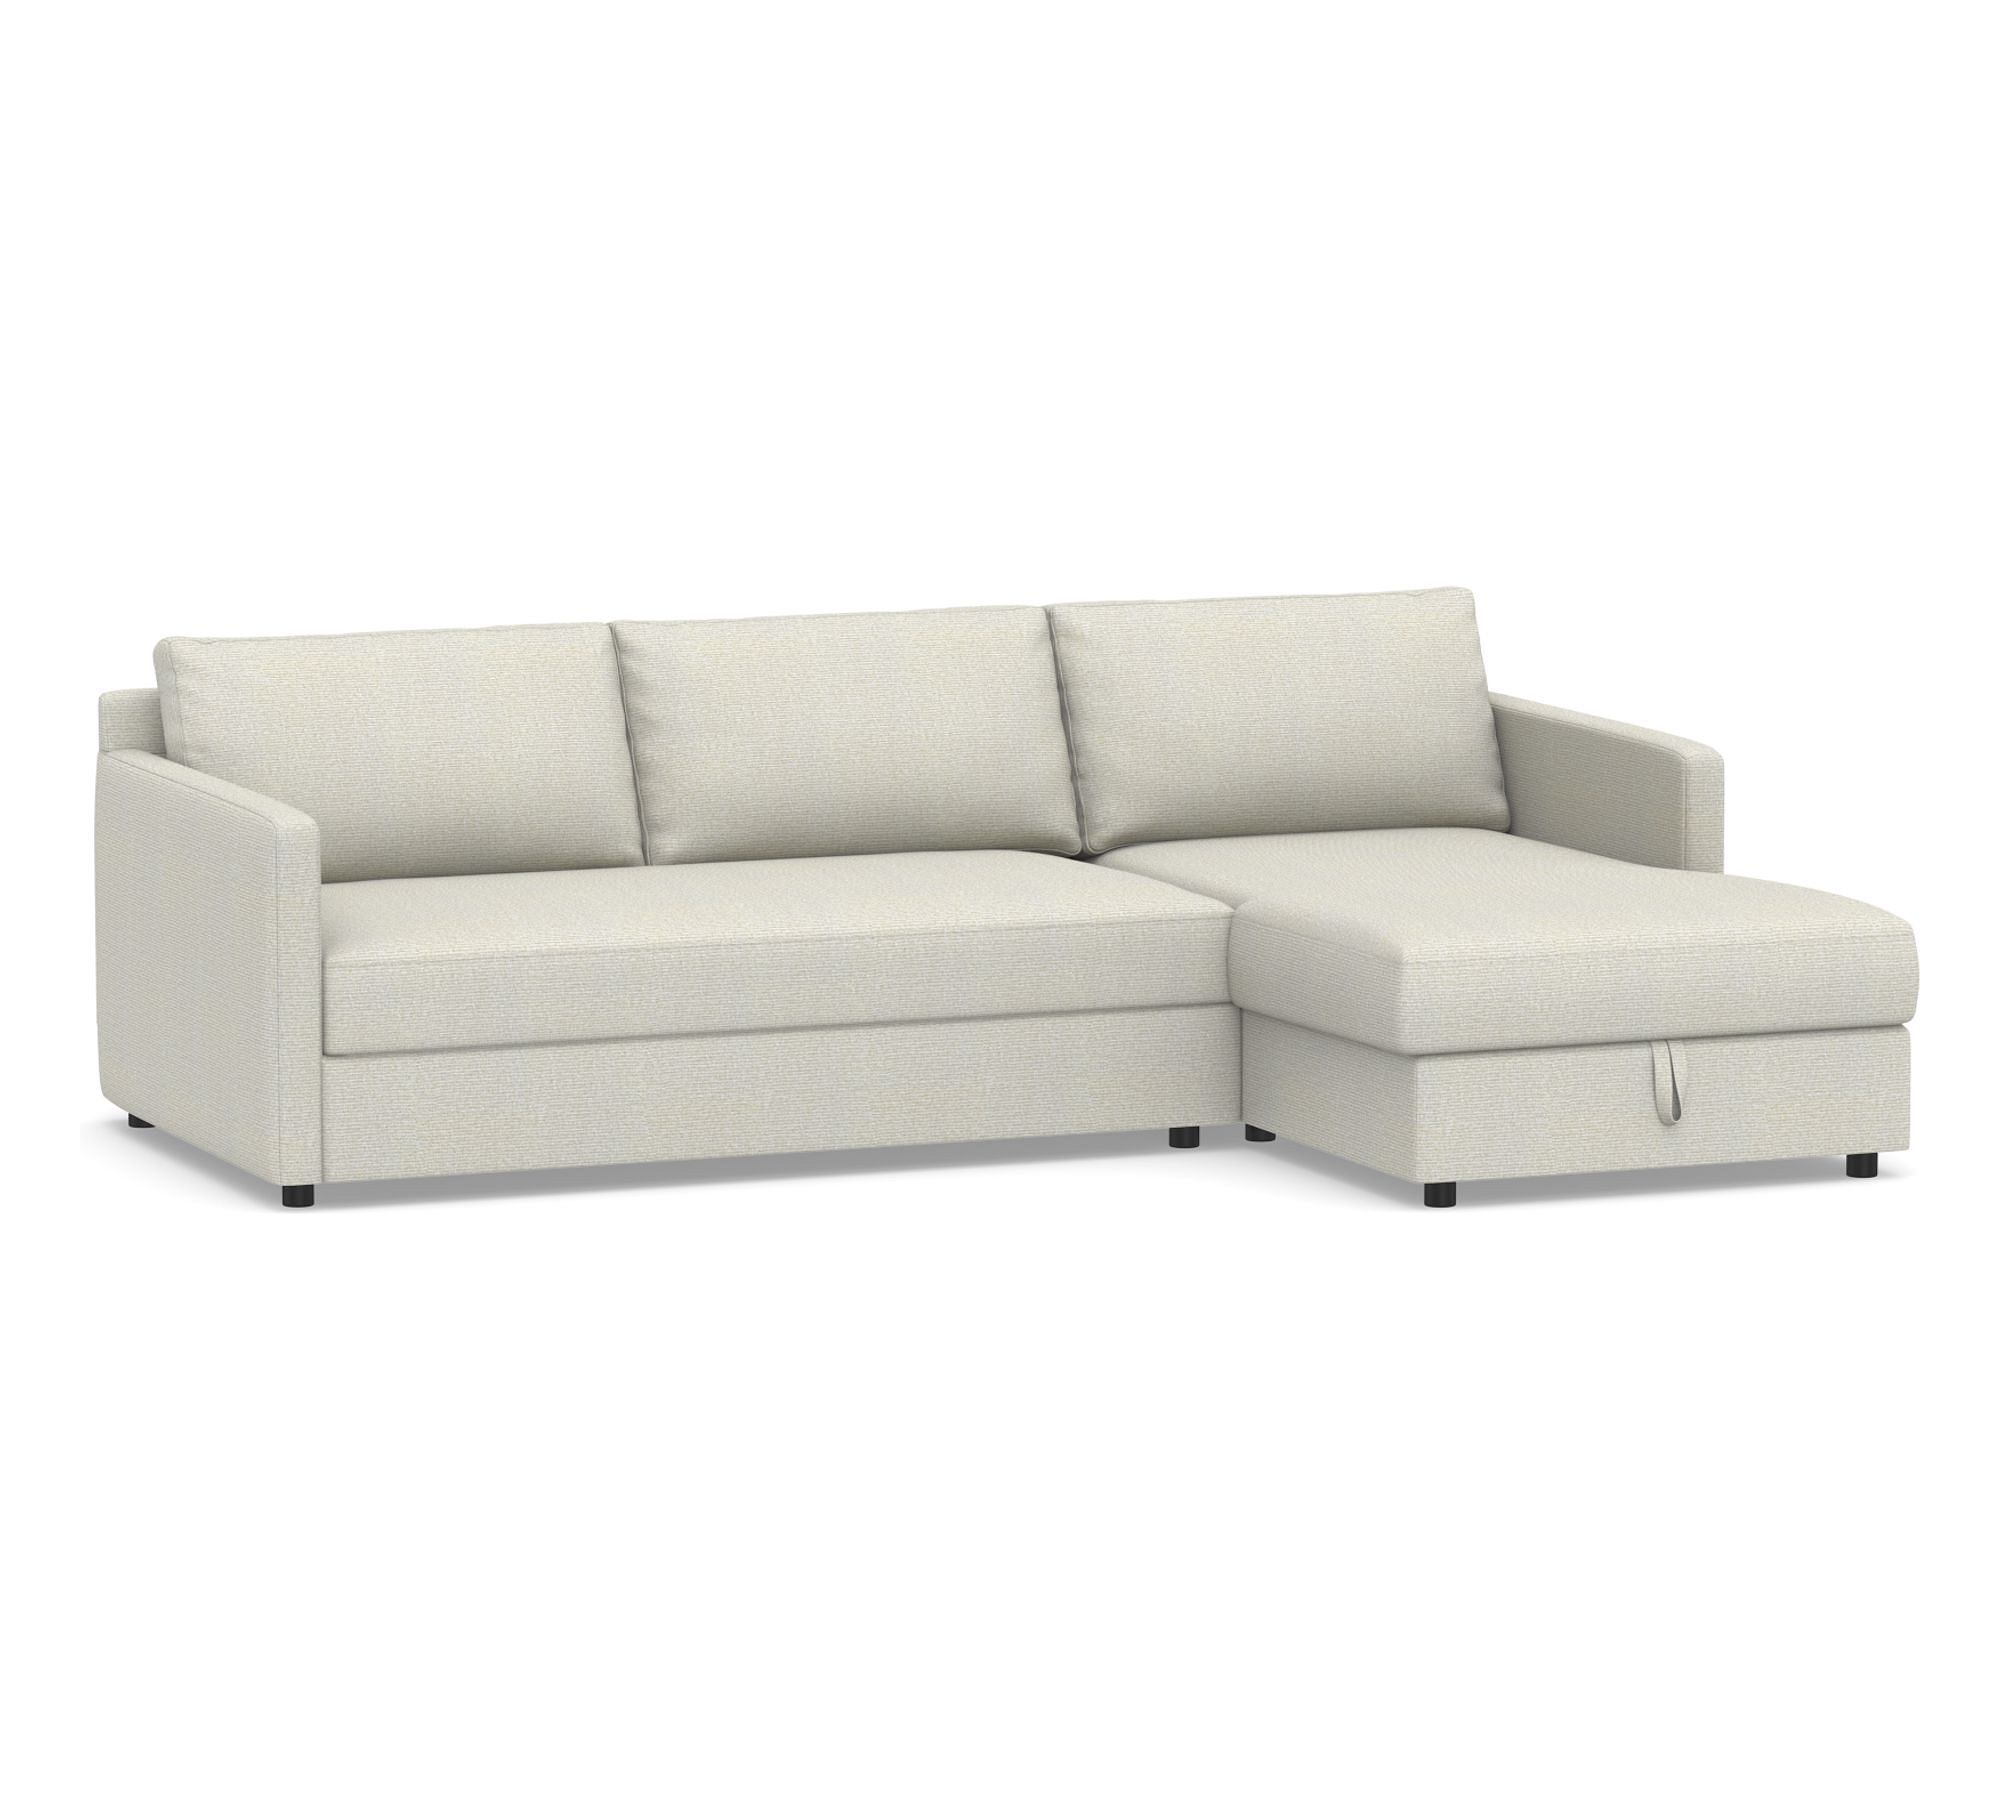 Pacifica Trundle Sleeper Chaise Sectional - Storage Available (99")